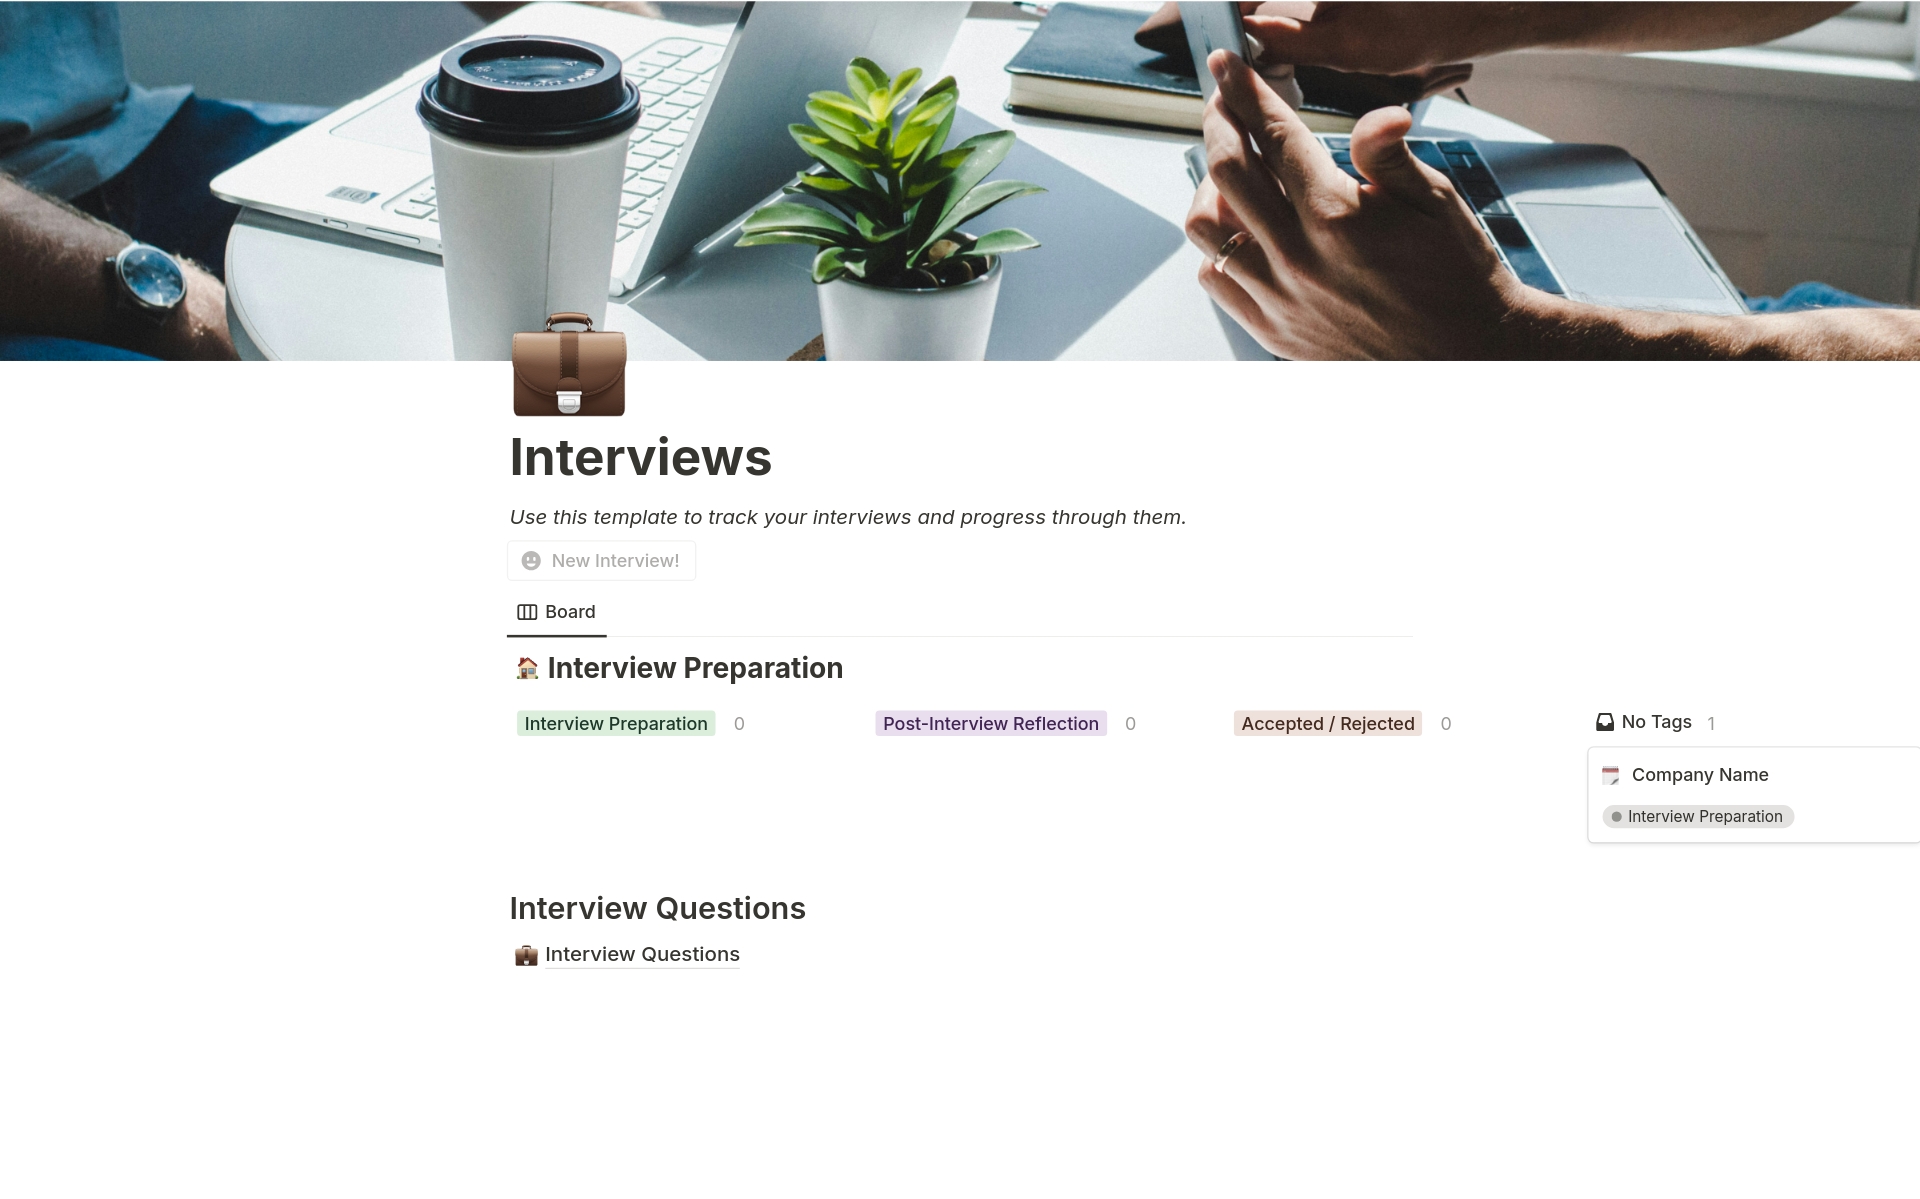 Launch your interview prep with our Notion Template, designed for job seekers. Get tips, track progress, and build a custom question bank. Tailored for success, it's your key to acing interviews.